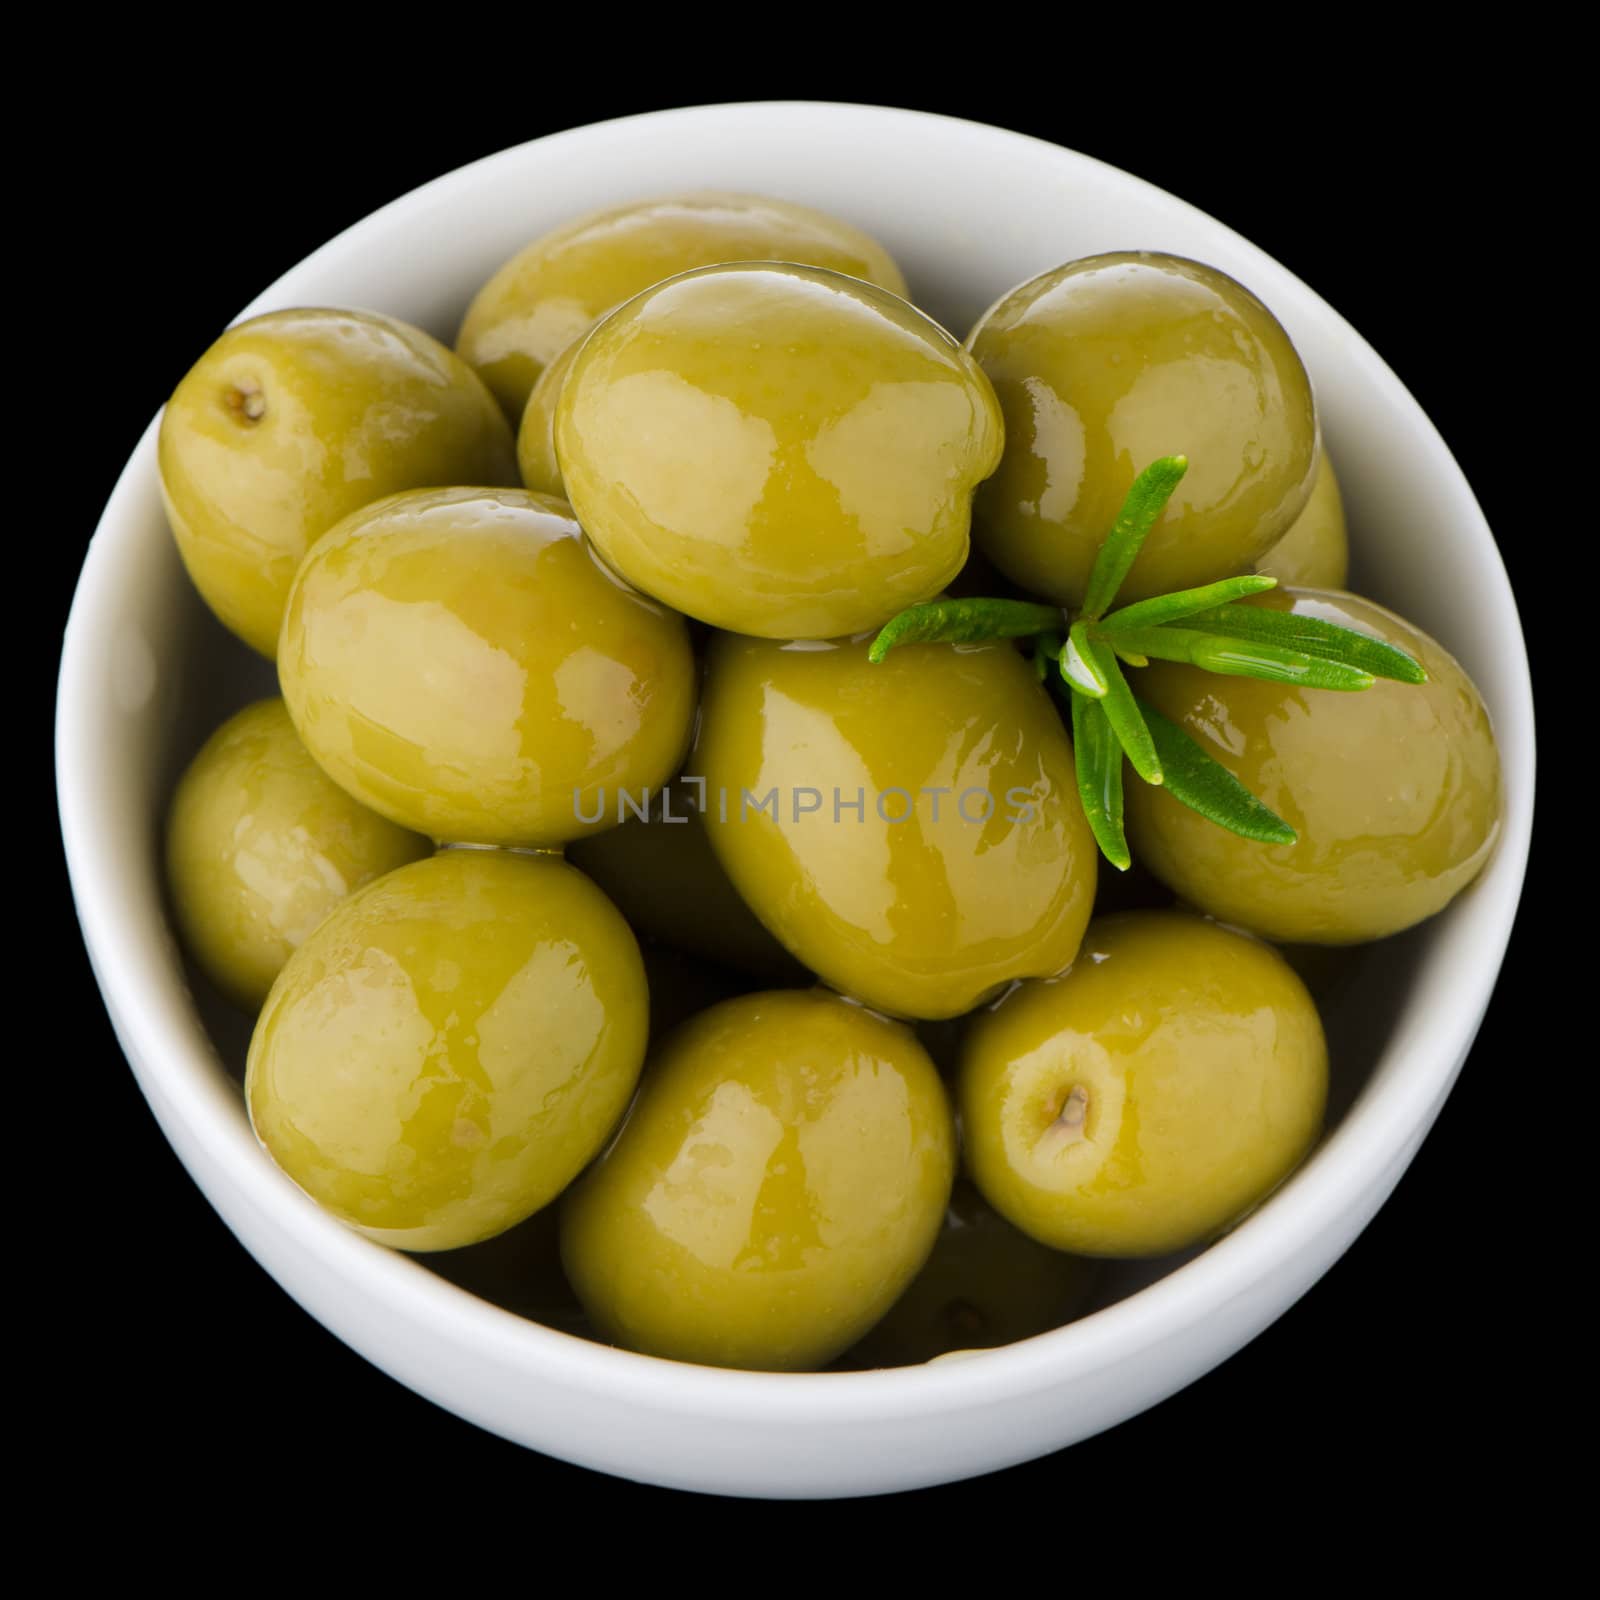 Green olives in a white ceramic bowl on black background.